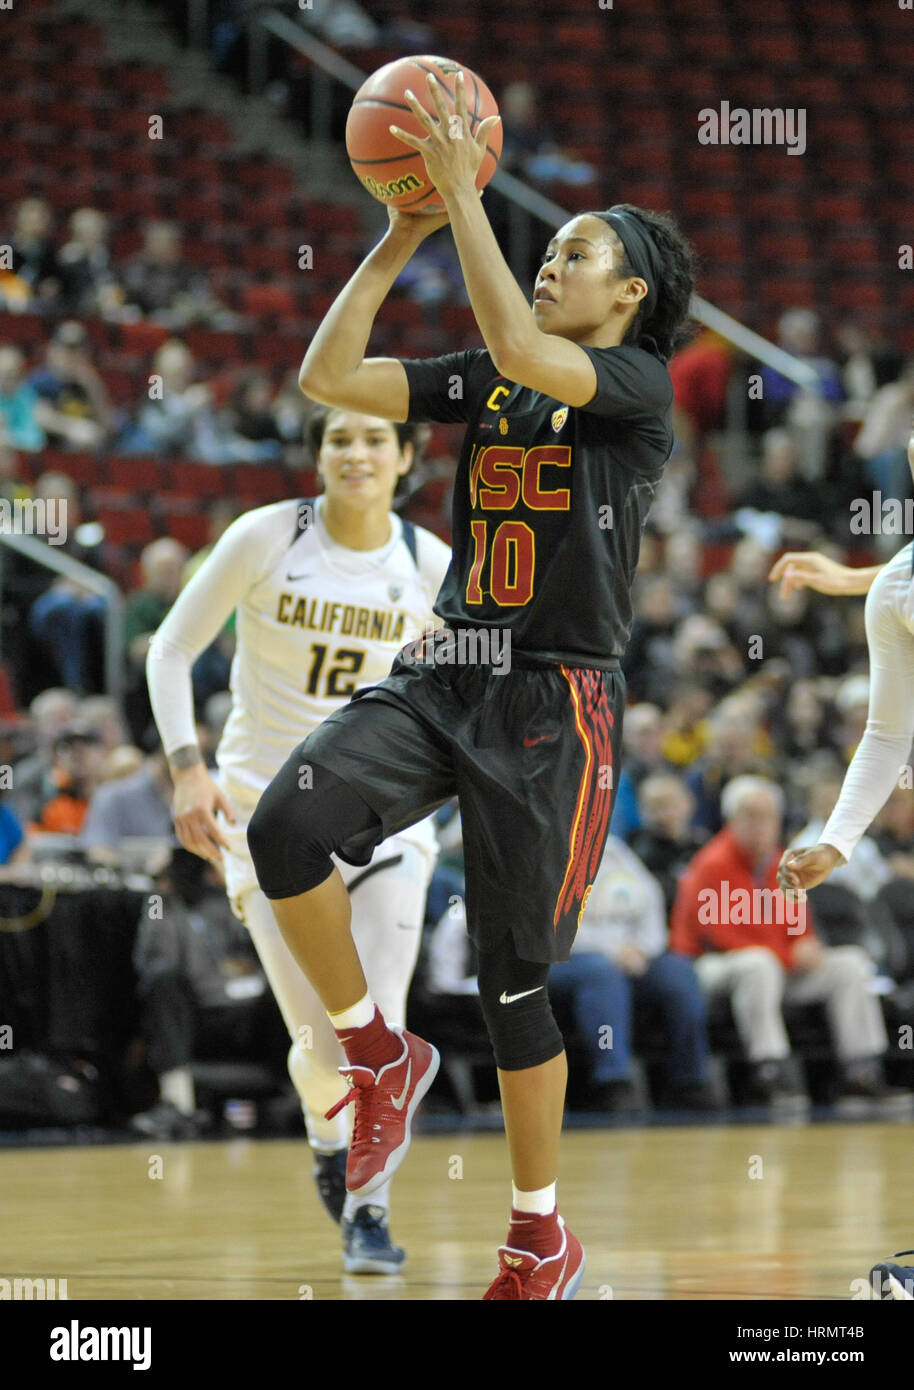 Seattle, WA, USA. 2nd Mar, 2017. USC guard Courtney Jaco (10) in action during a PAC12 women's tournament game between the Cal Bears and the USC Trojans. The game was played at Key Arena in Seattle, WA. Jeff Halstead/CSM/Alamy Live News Stock Photo